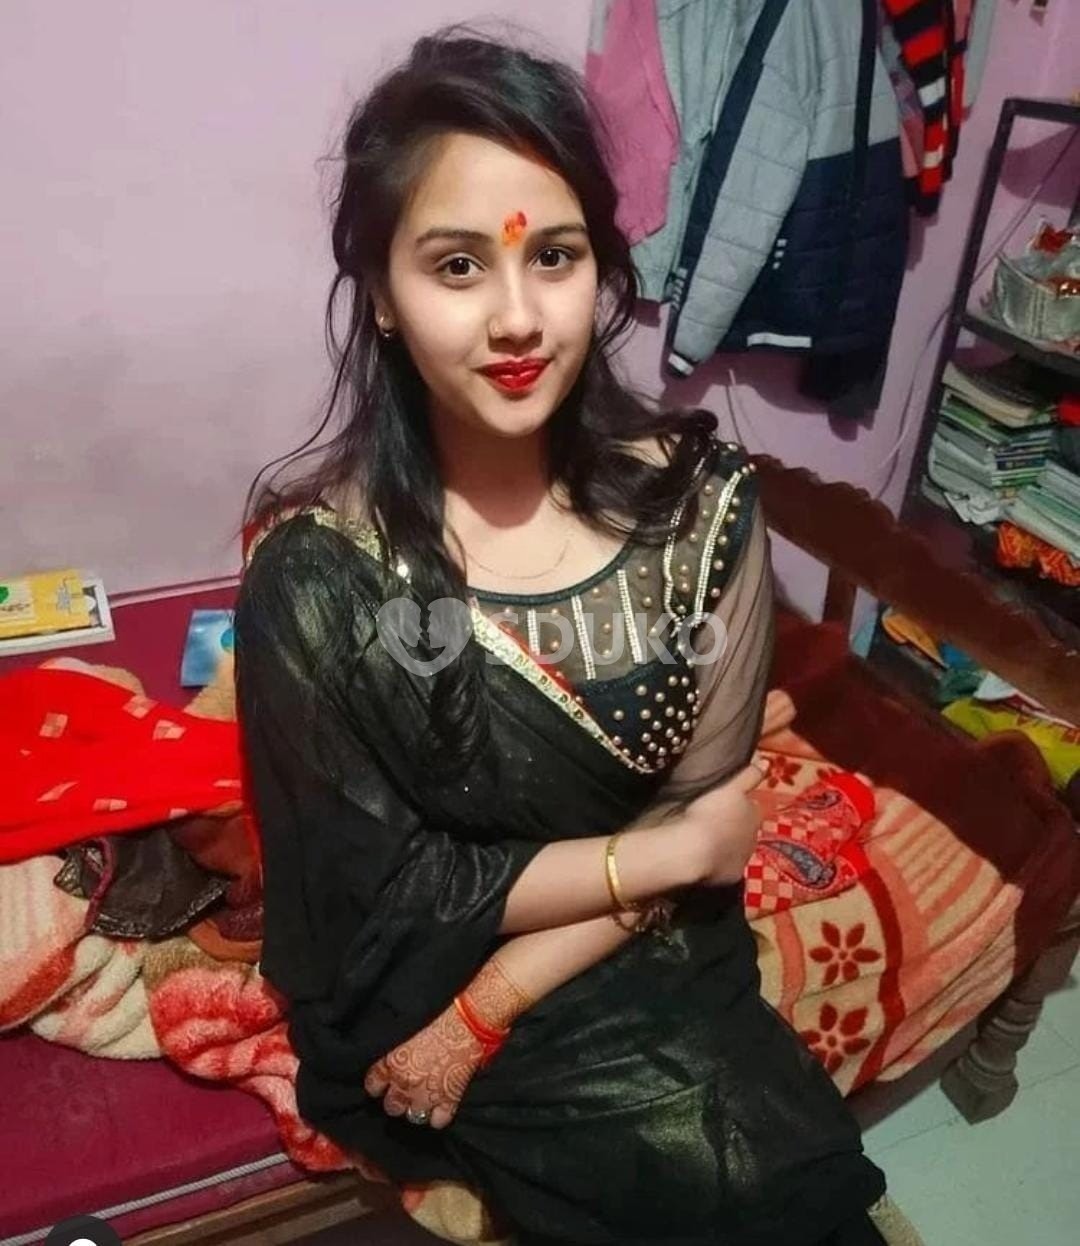 Azamgarh ANJUBAI VIP INDEPENDENT GIRLS AVAILABLE IN LOW PRICE